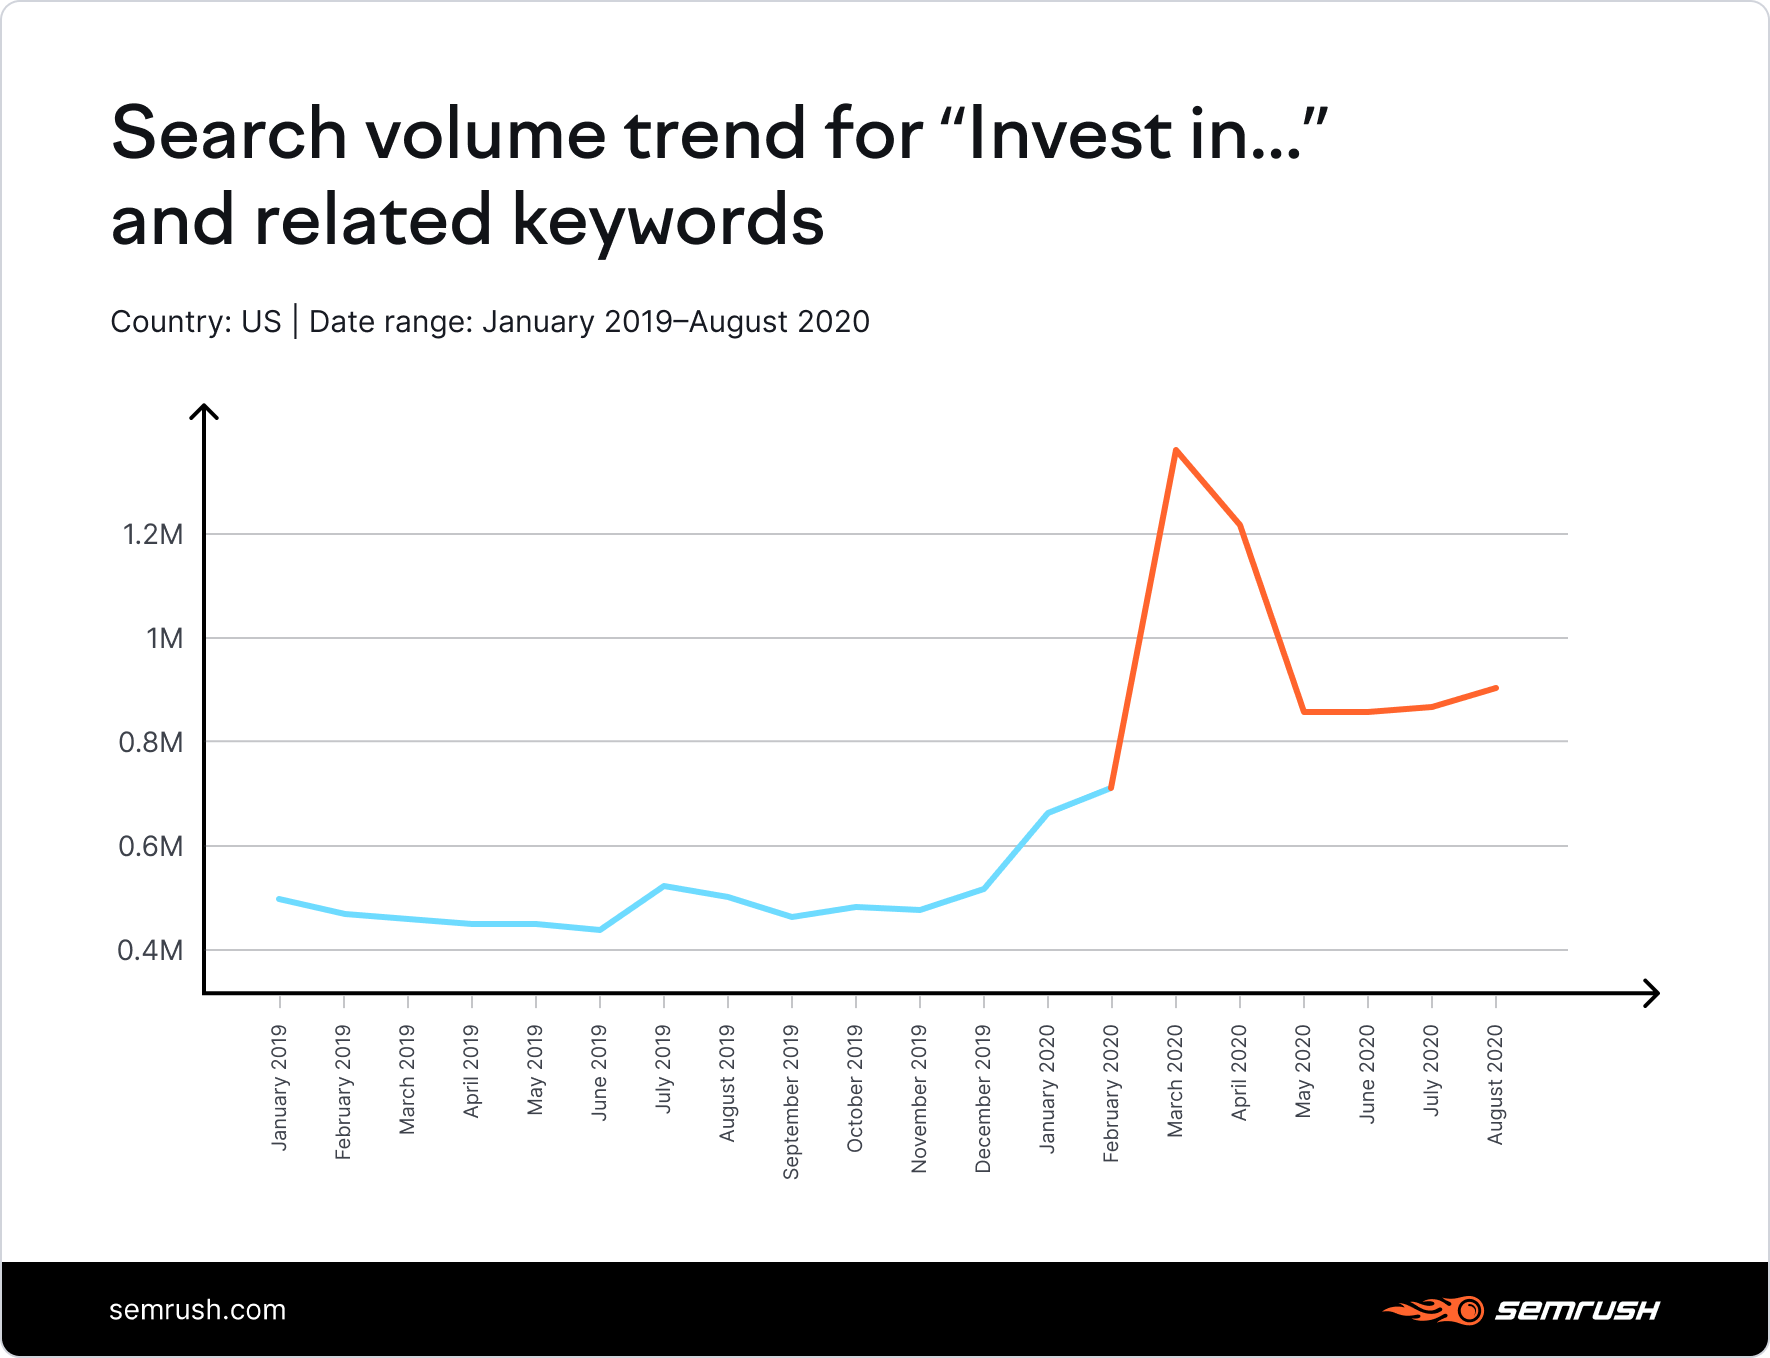 Search volume trend for "Invest in..." and related keywords